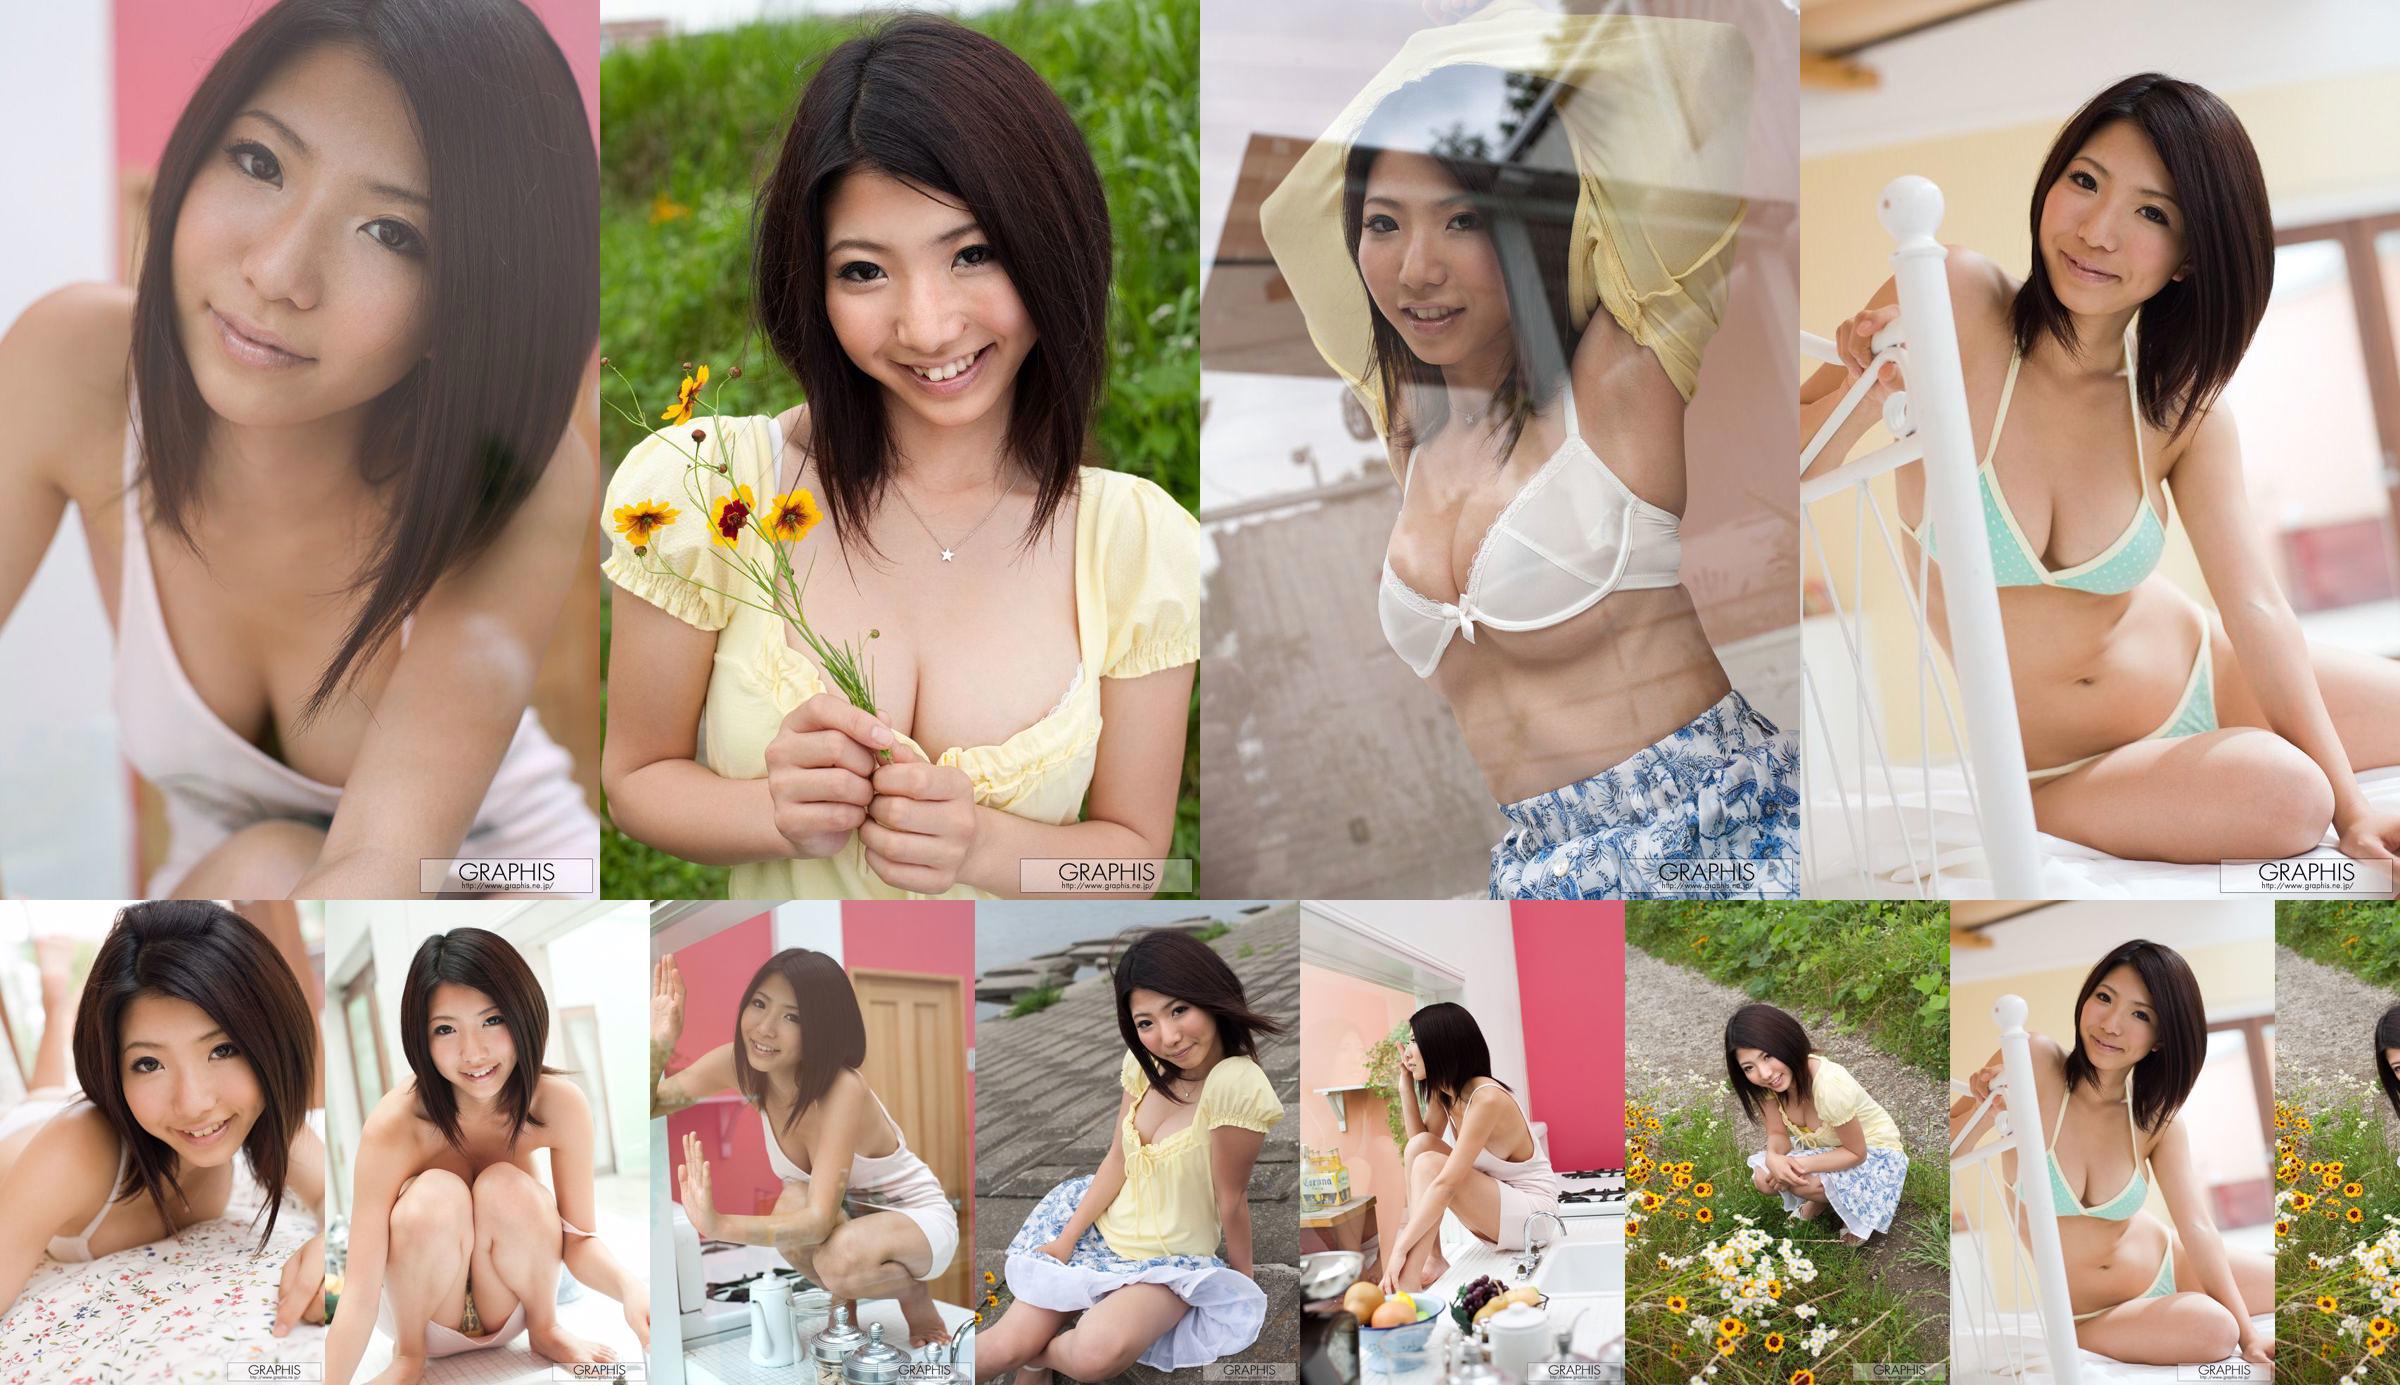 An Ann 《Simple and Innocent》 [Graphis] Gals No.9cd78e Page 1